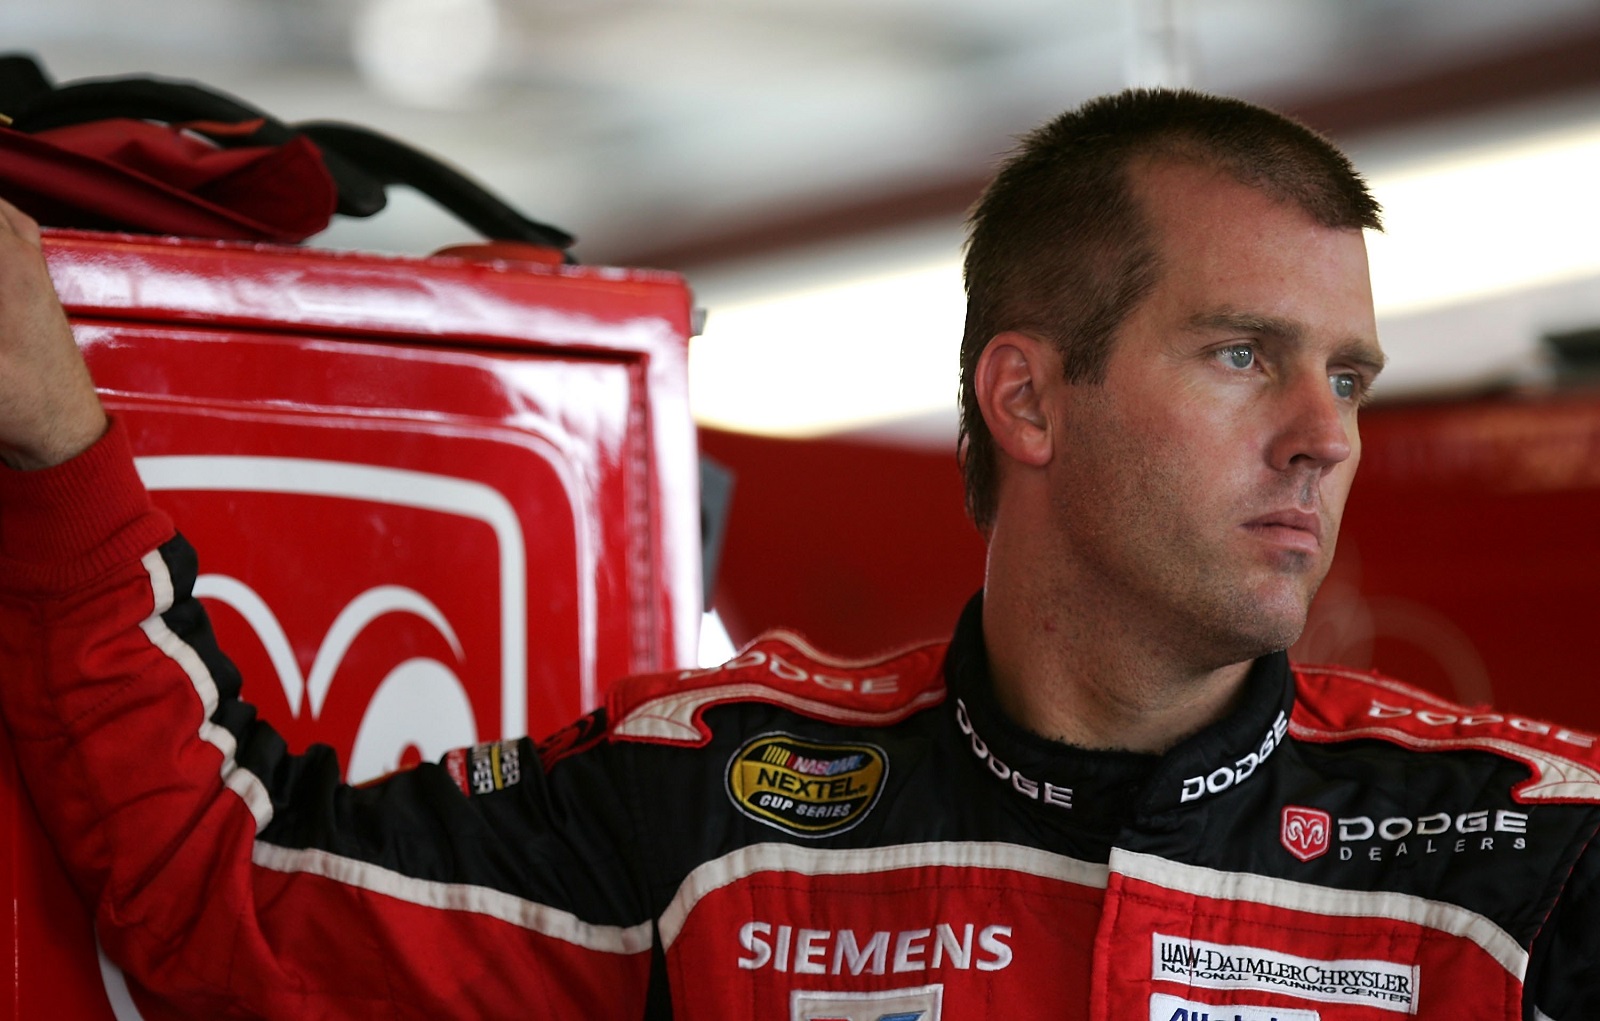 NASCAR driver Jeremy Mayfield stands by his car and looks out onto the track